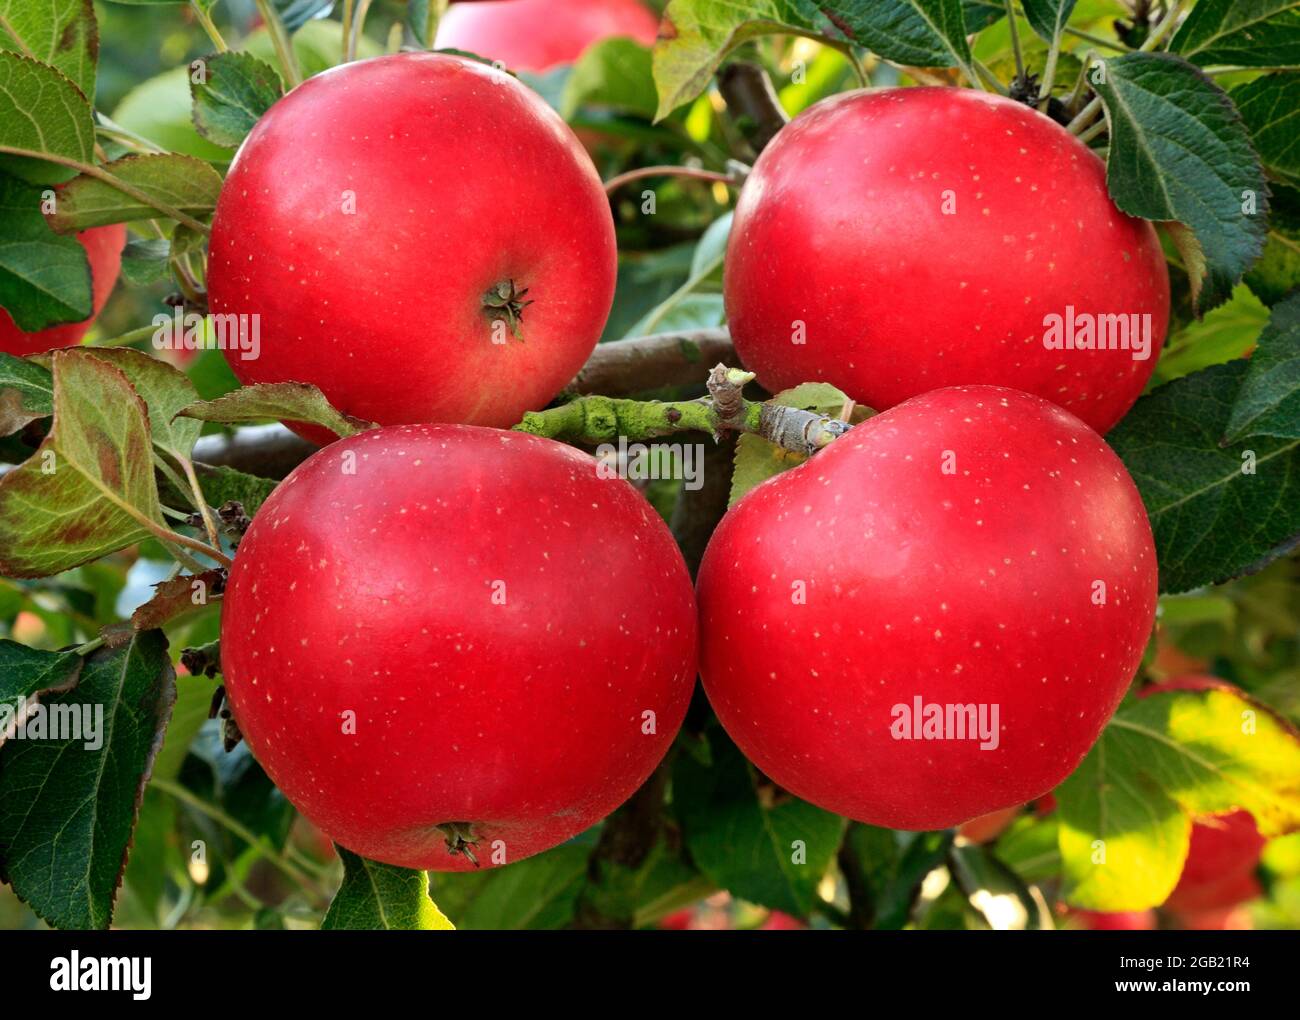 Apple 'Discovery', growing on tree, malus domestica, apples, fruit Stock Photo